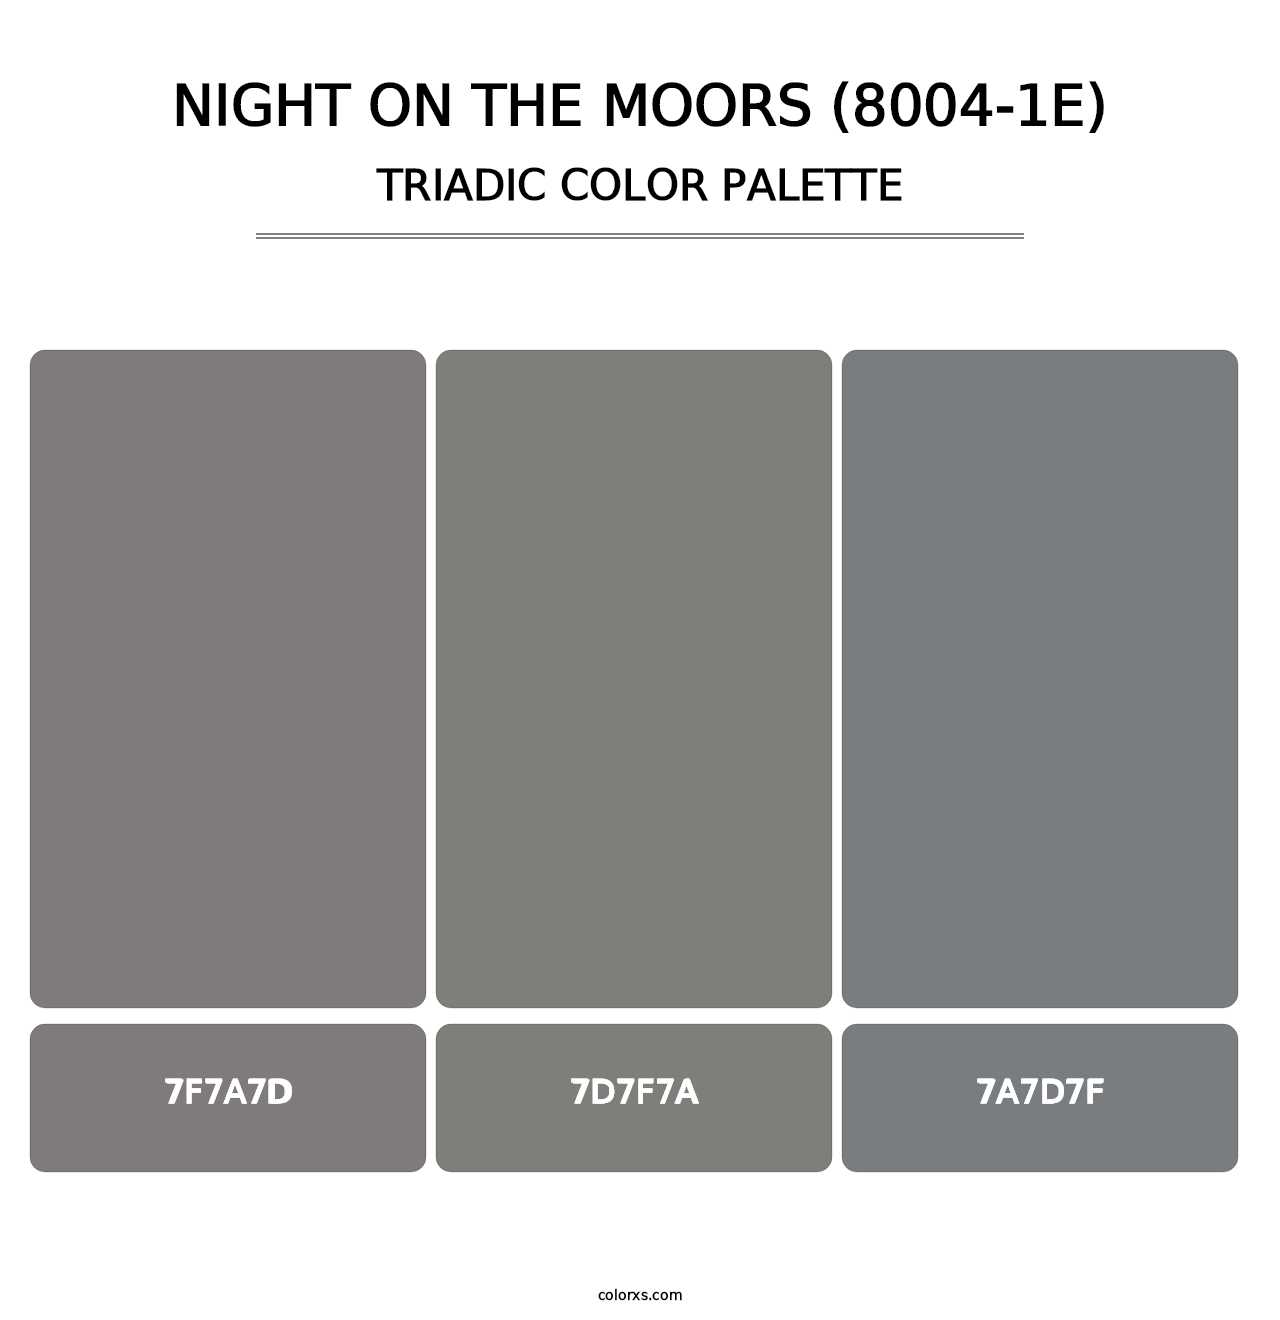 Night on the Moors (8004-1E) - Triadic Color Palette